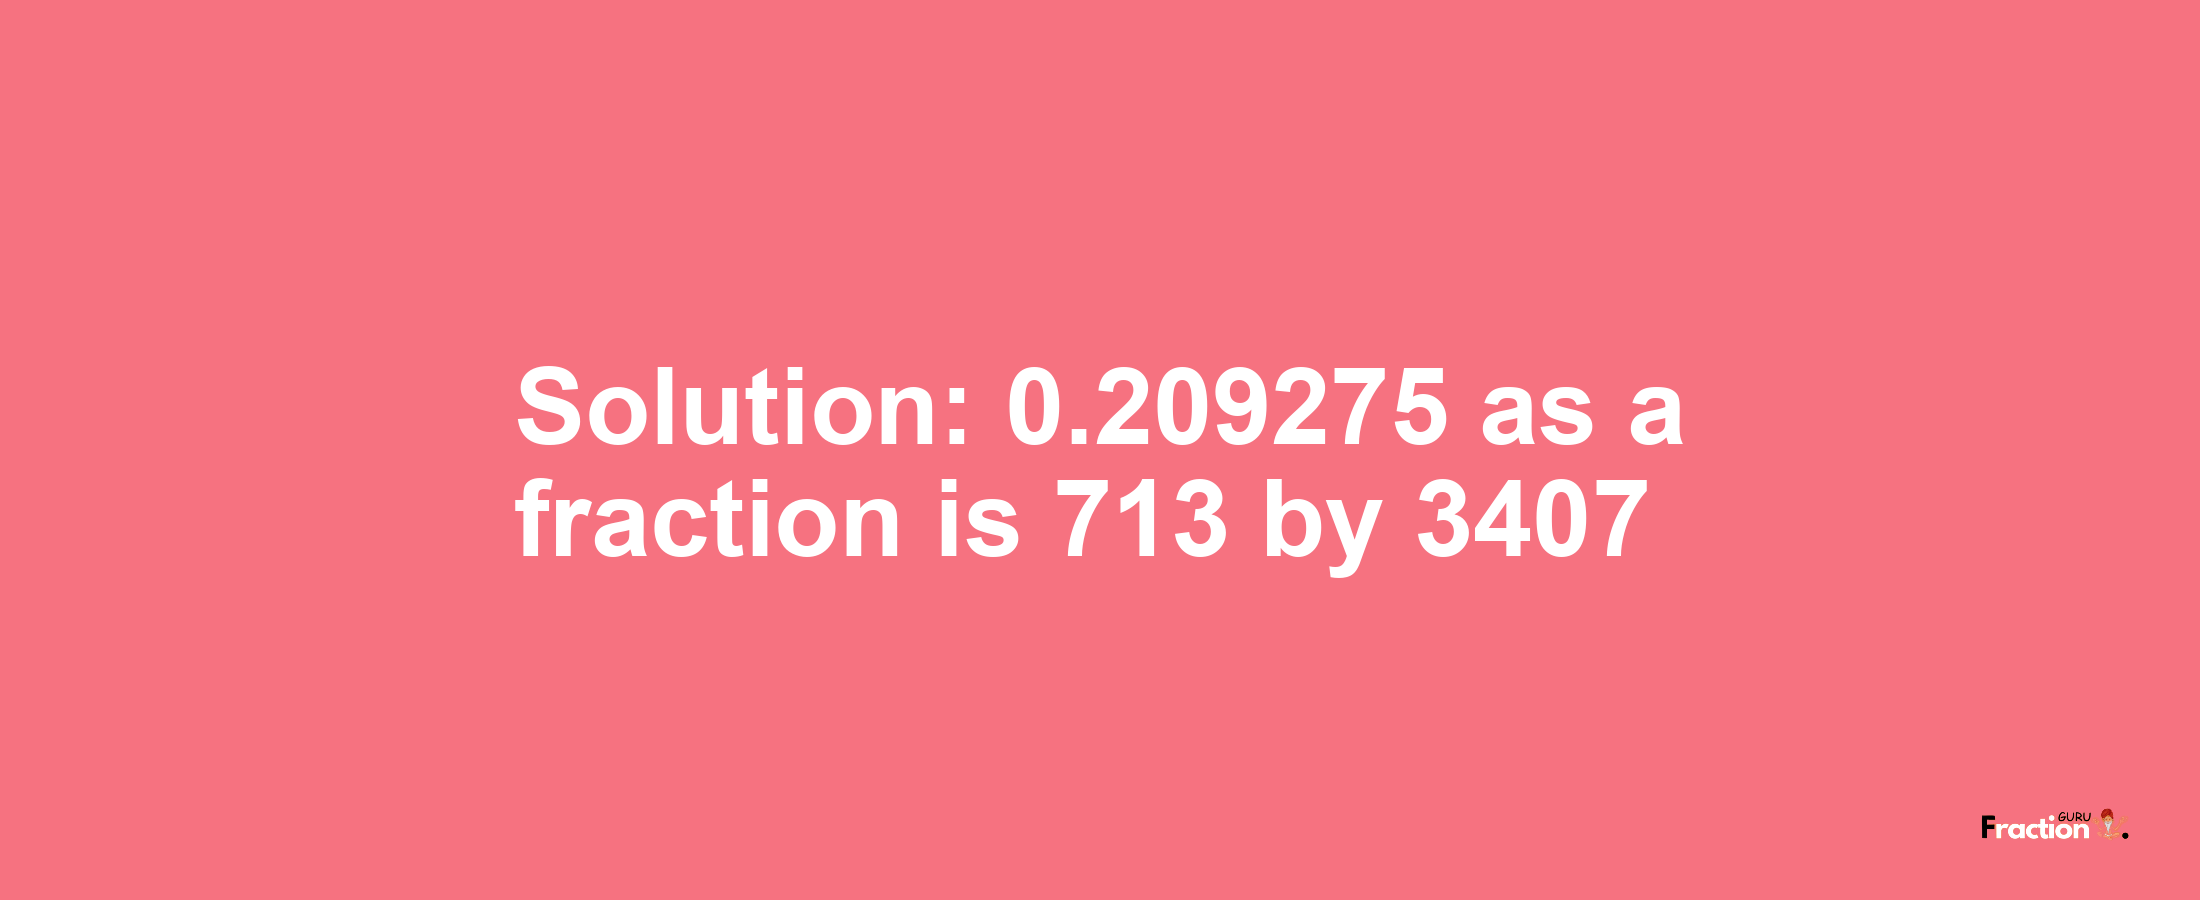 Solution:0.209275 as a fraction is 713/3407